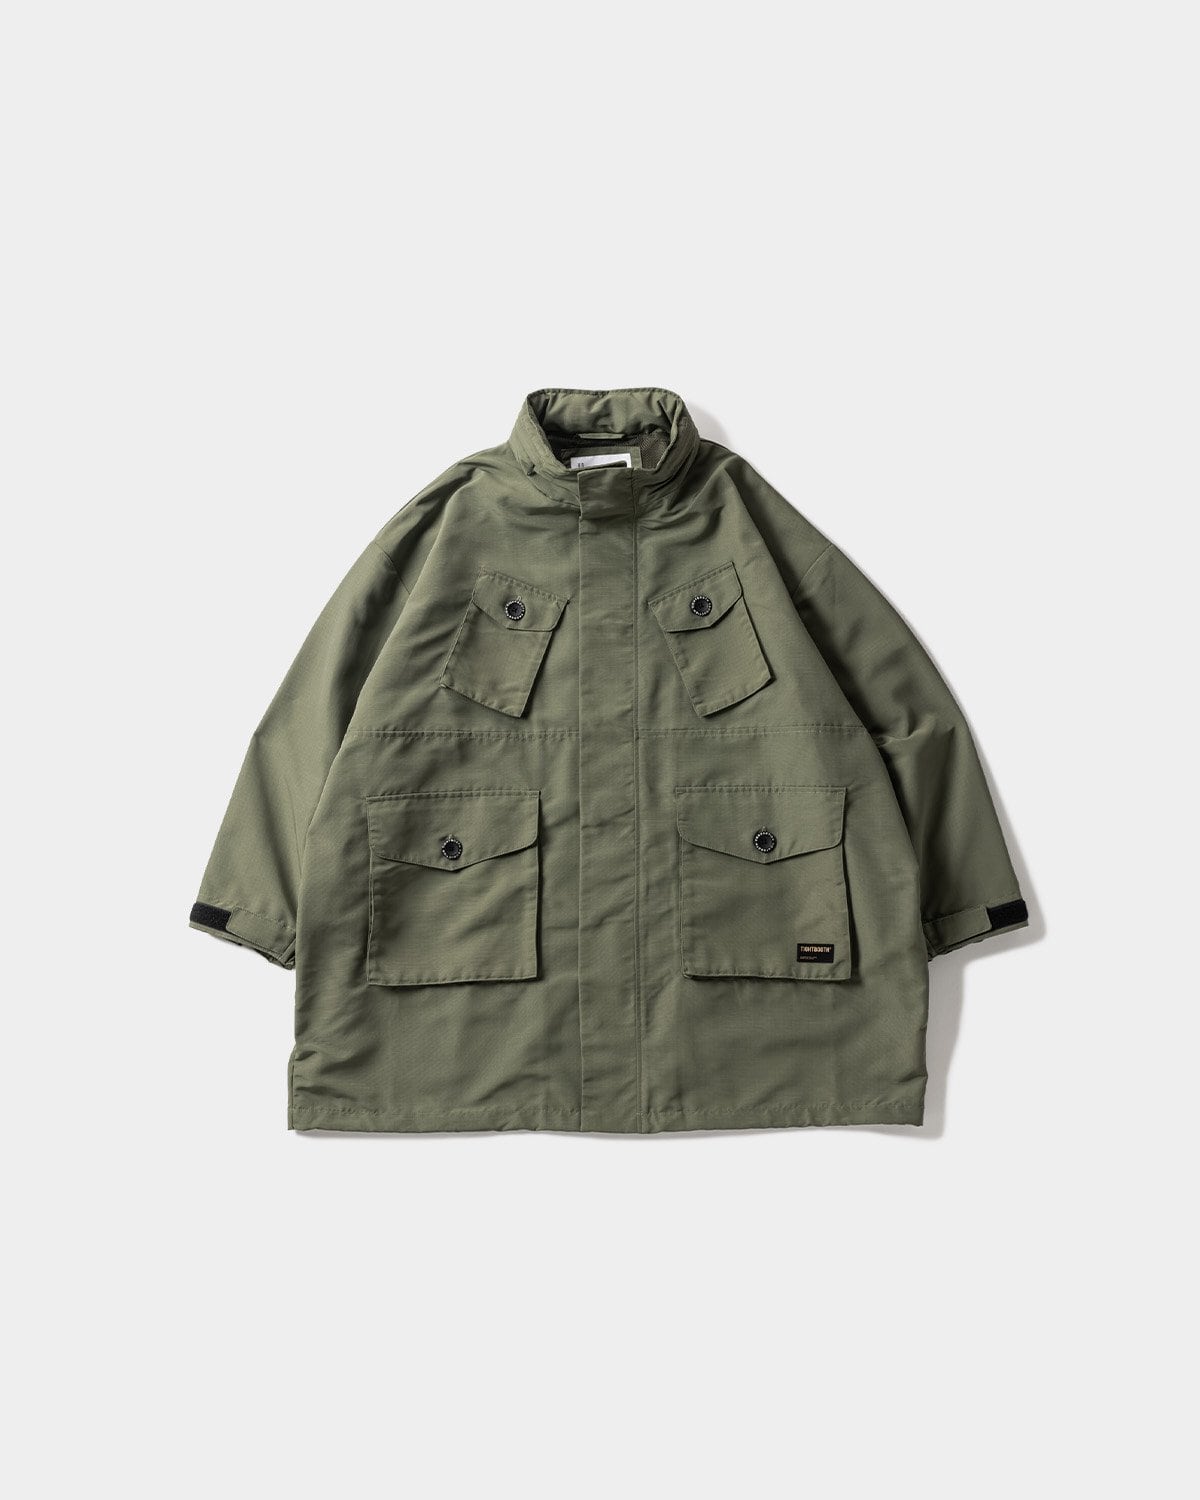 TIGHT BOOTH HOODED BIG COAT OLIVE Lサイズ - アウター